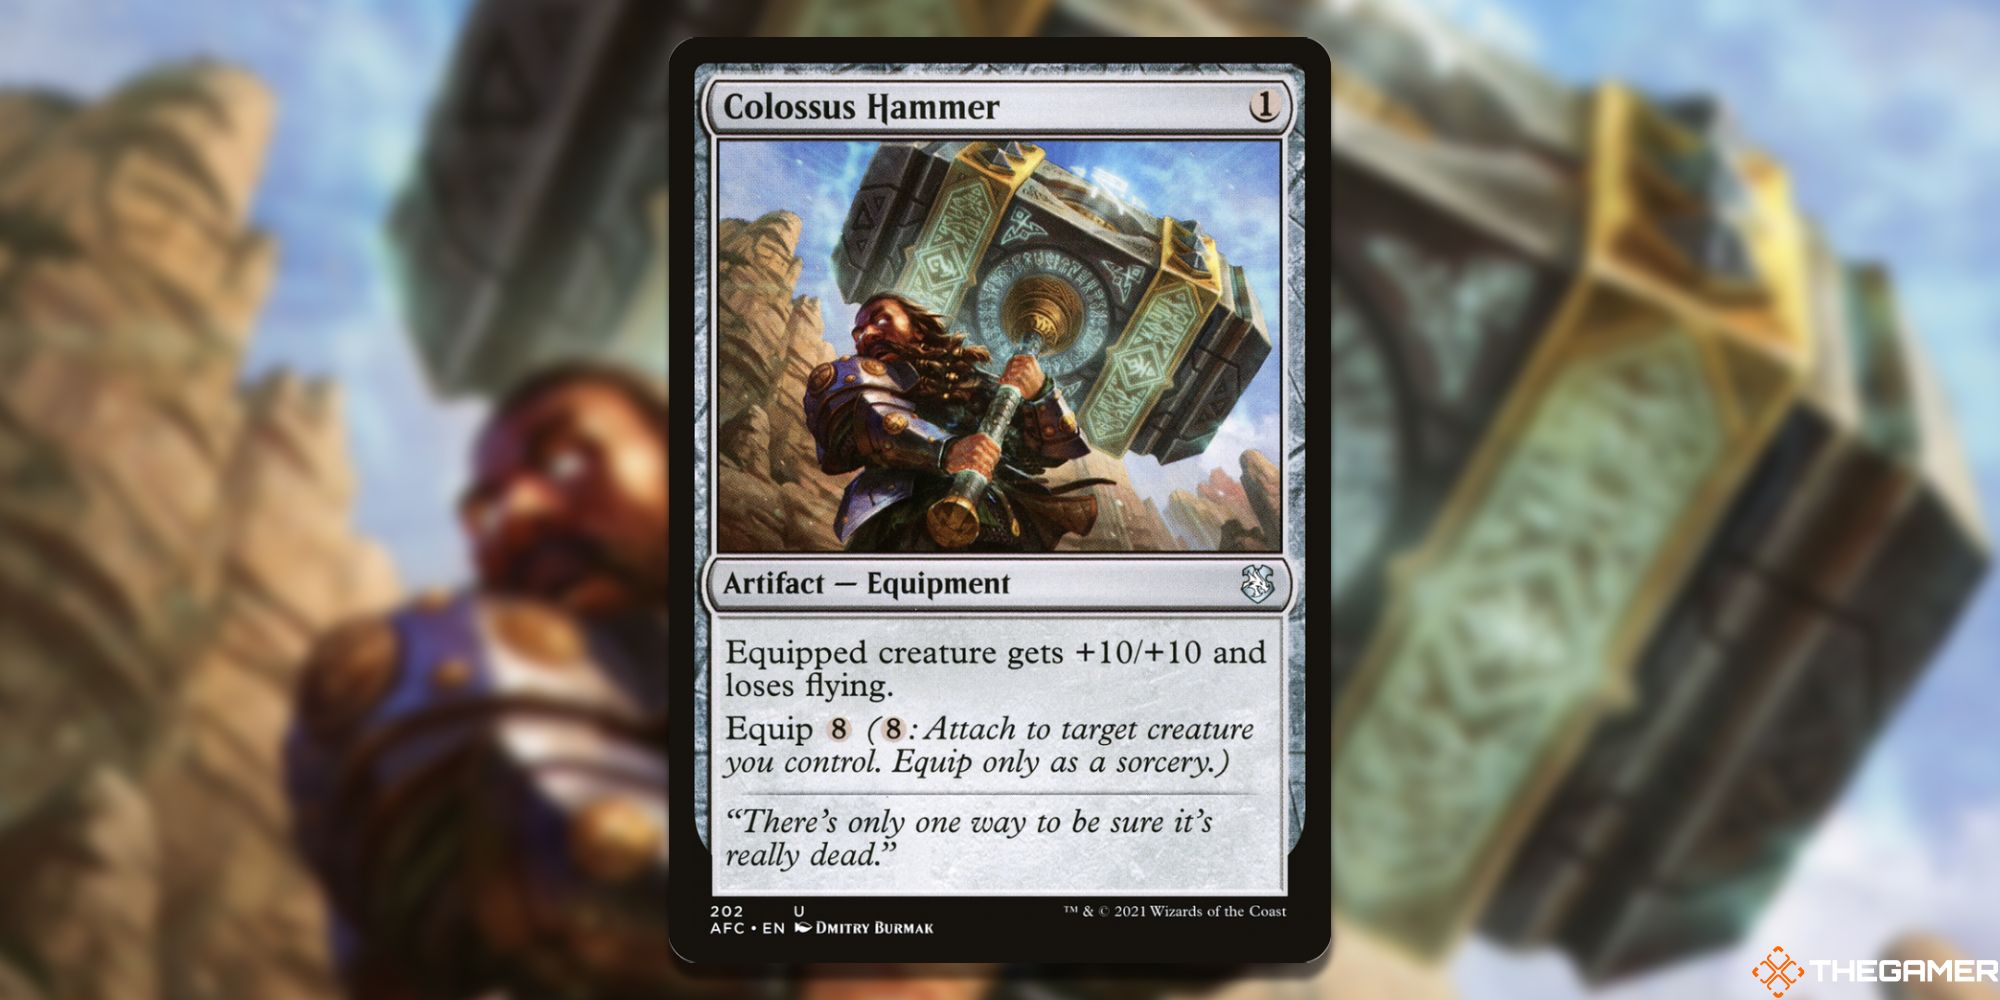 Image of the Colossus Hammer card in Magic: The Gathering, with art by Dmitry Burmak